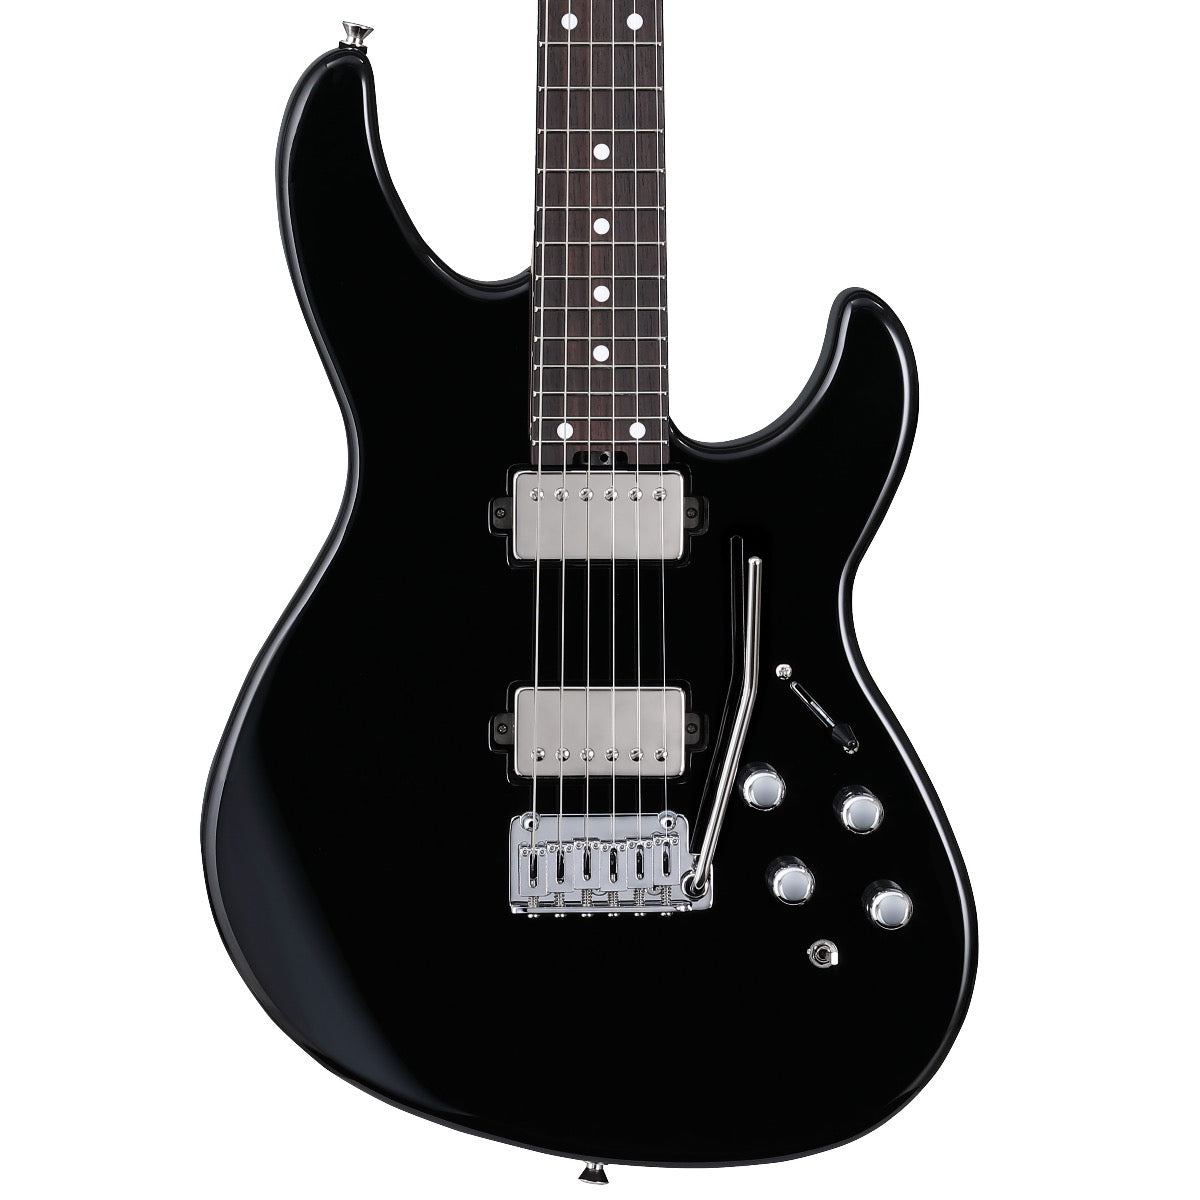 Close-up top view of Boss Eurus GS-1 Electronic Guitar - Black showing body and portion of neck